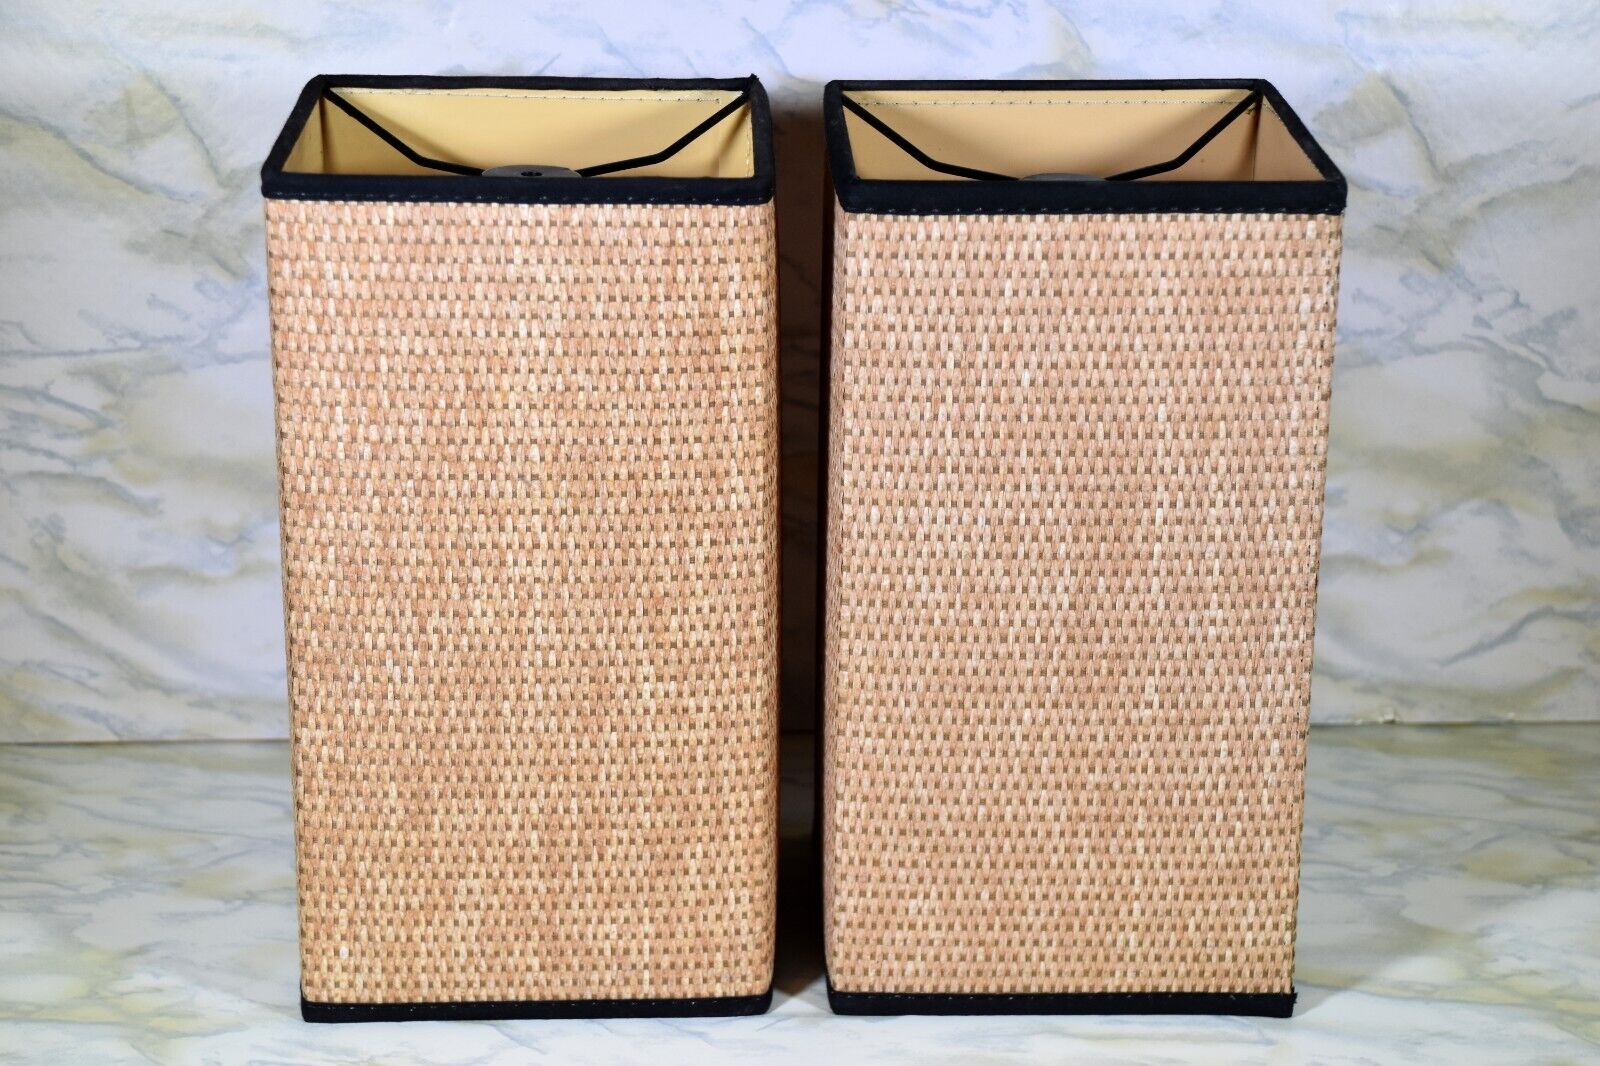 Lampshades Basket Weave Woven Tall Rectangular Vintage $